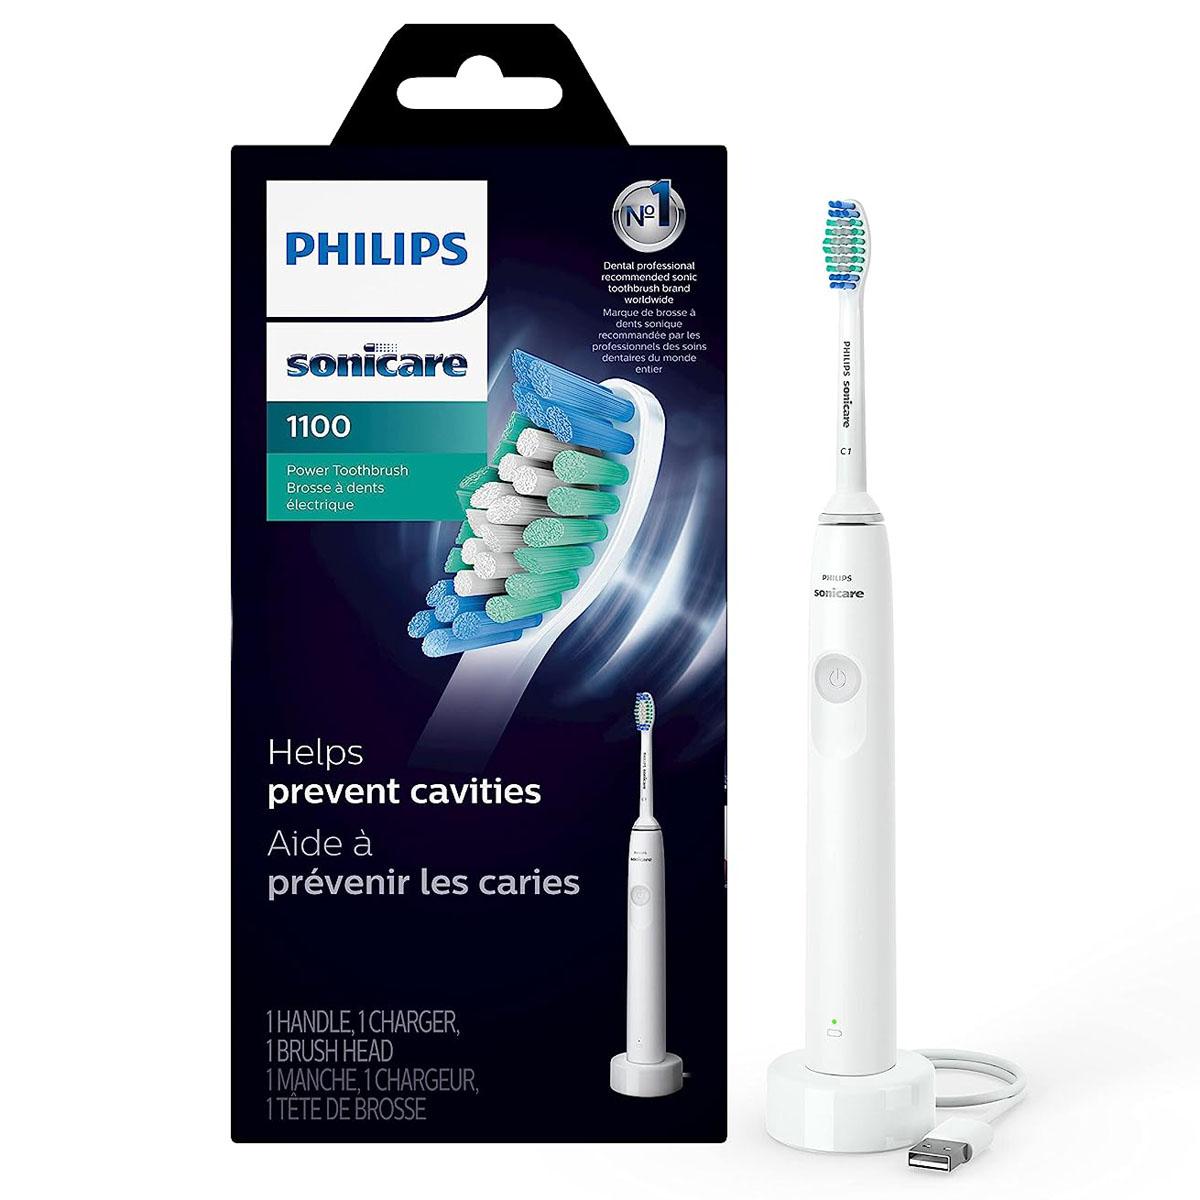 Philips 1100 Series Sonic Electric Toothbrush for $19.96